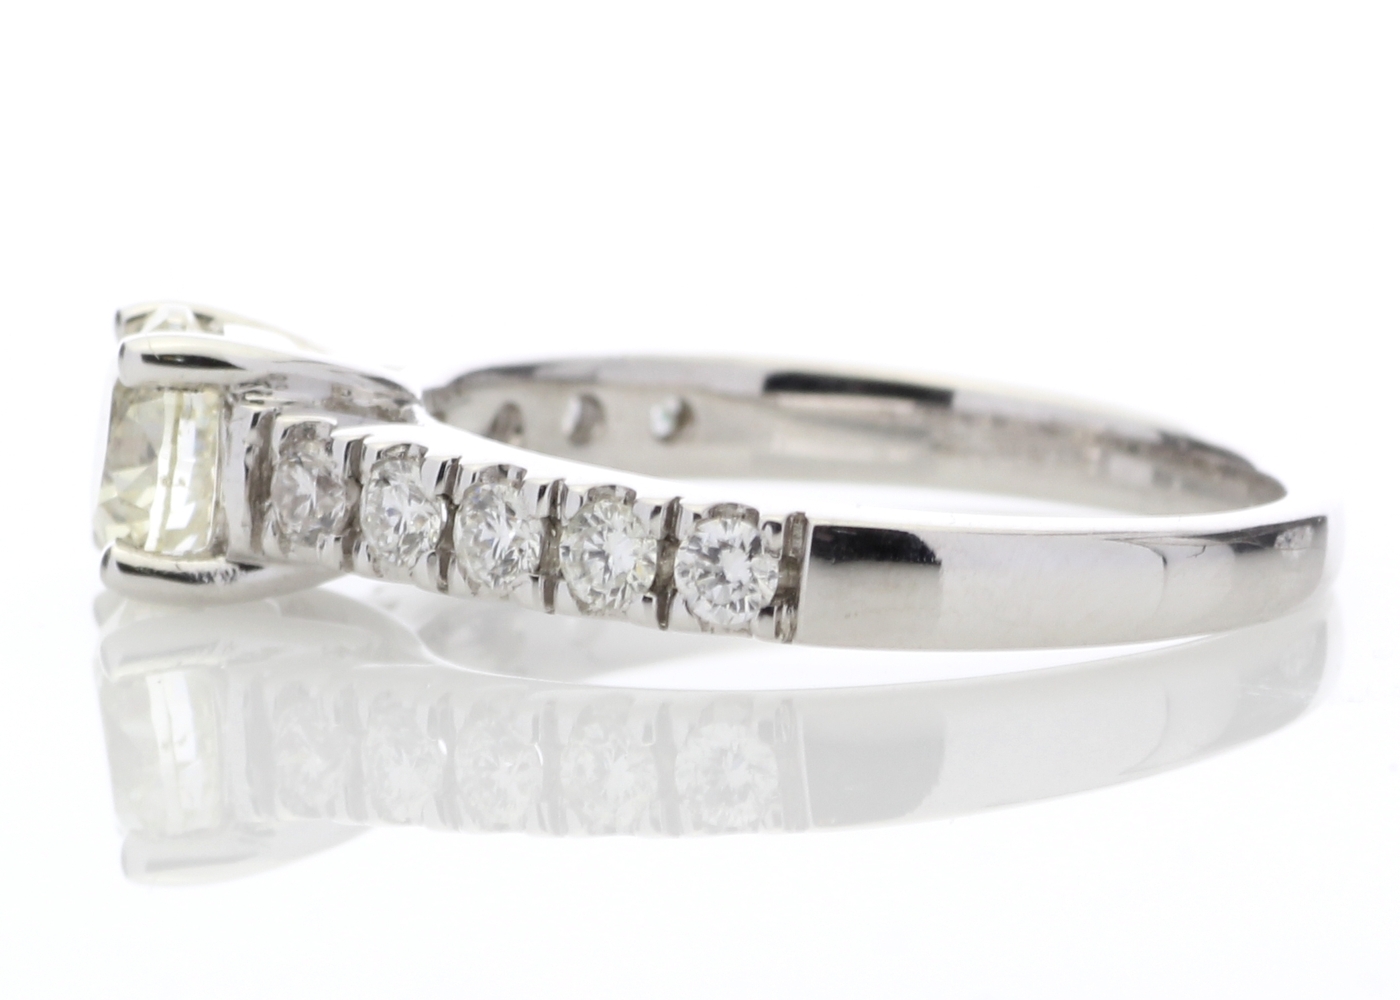 18ct White Gold Single Stone Claw Set With Stone Set Shoulders Diamond Ring 0.61 Carats - Image 3 of 4